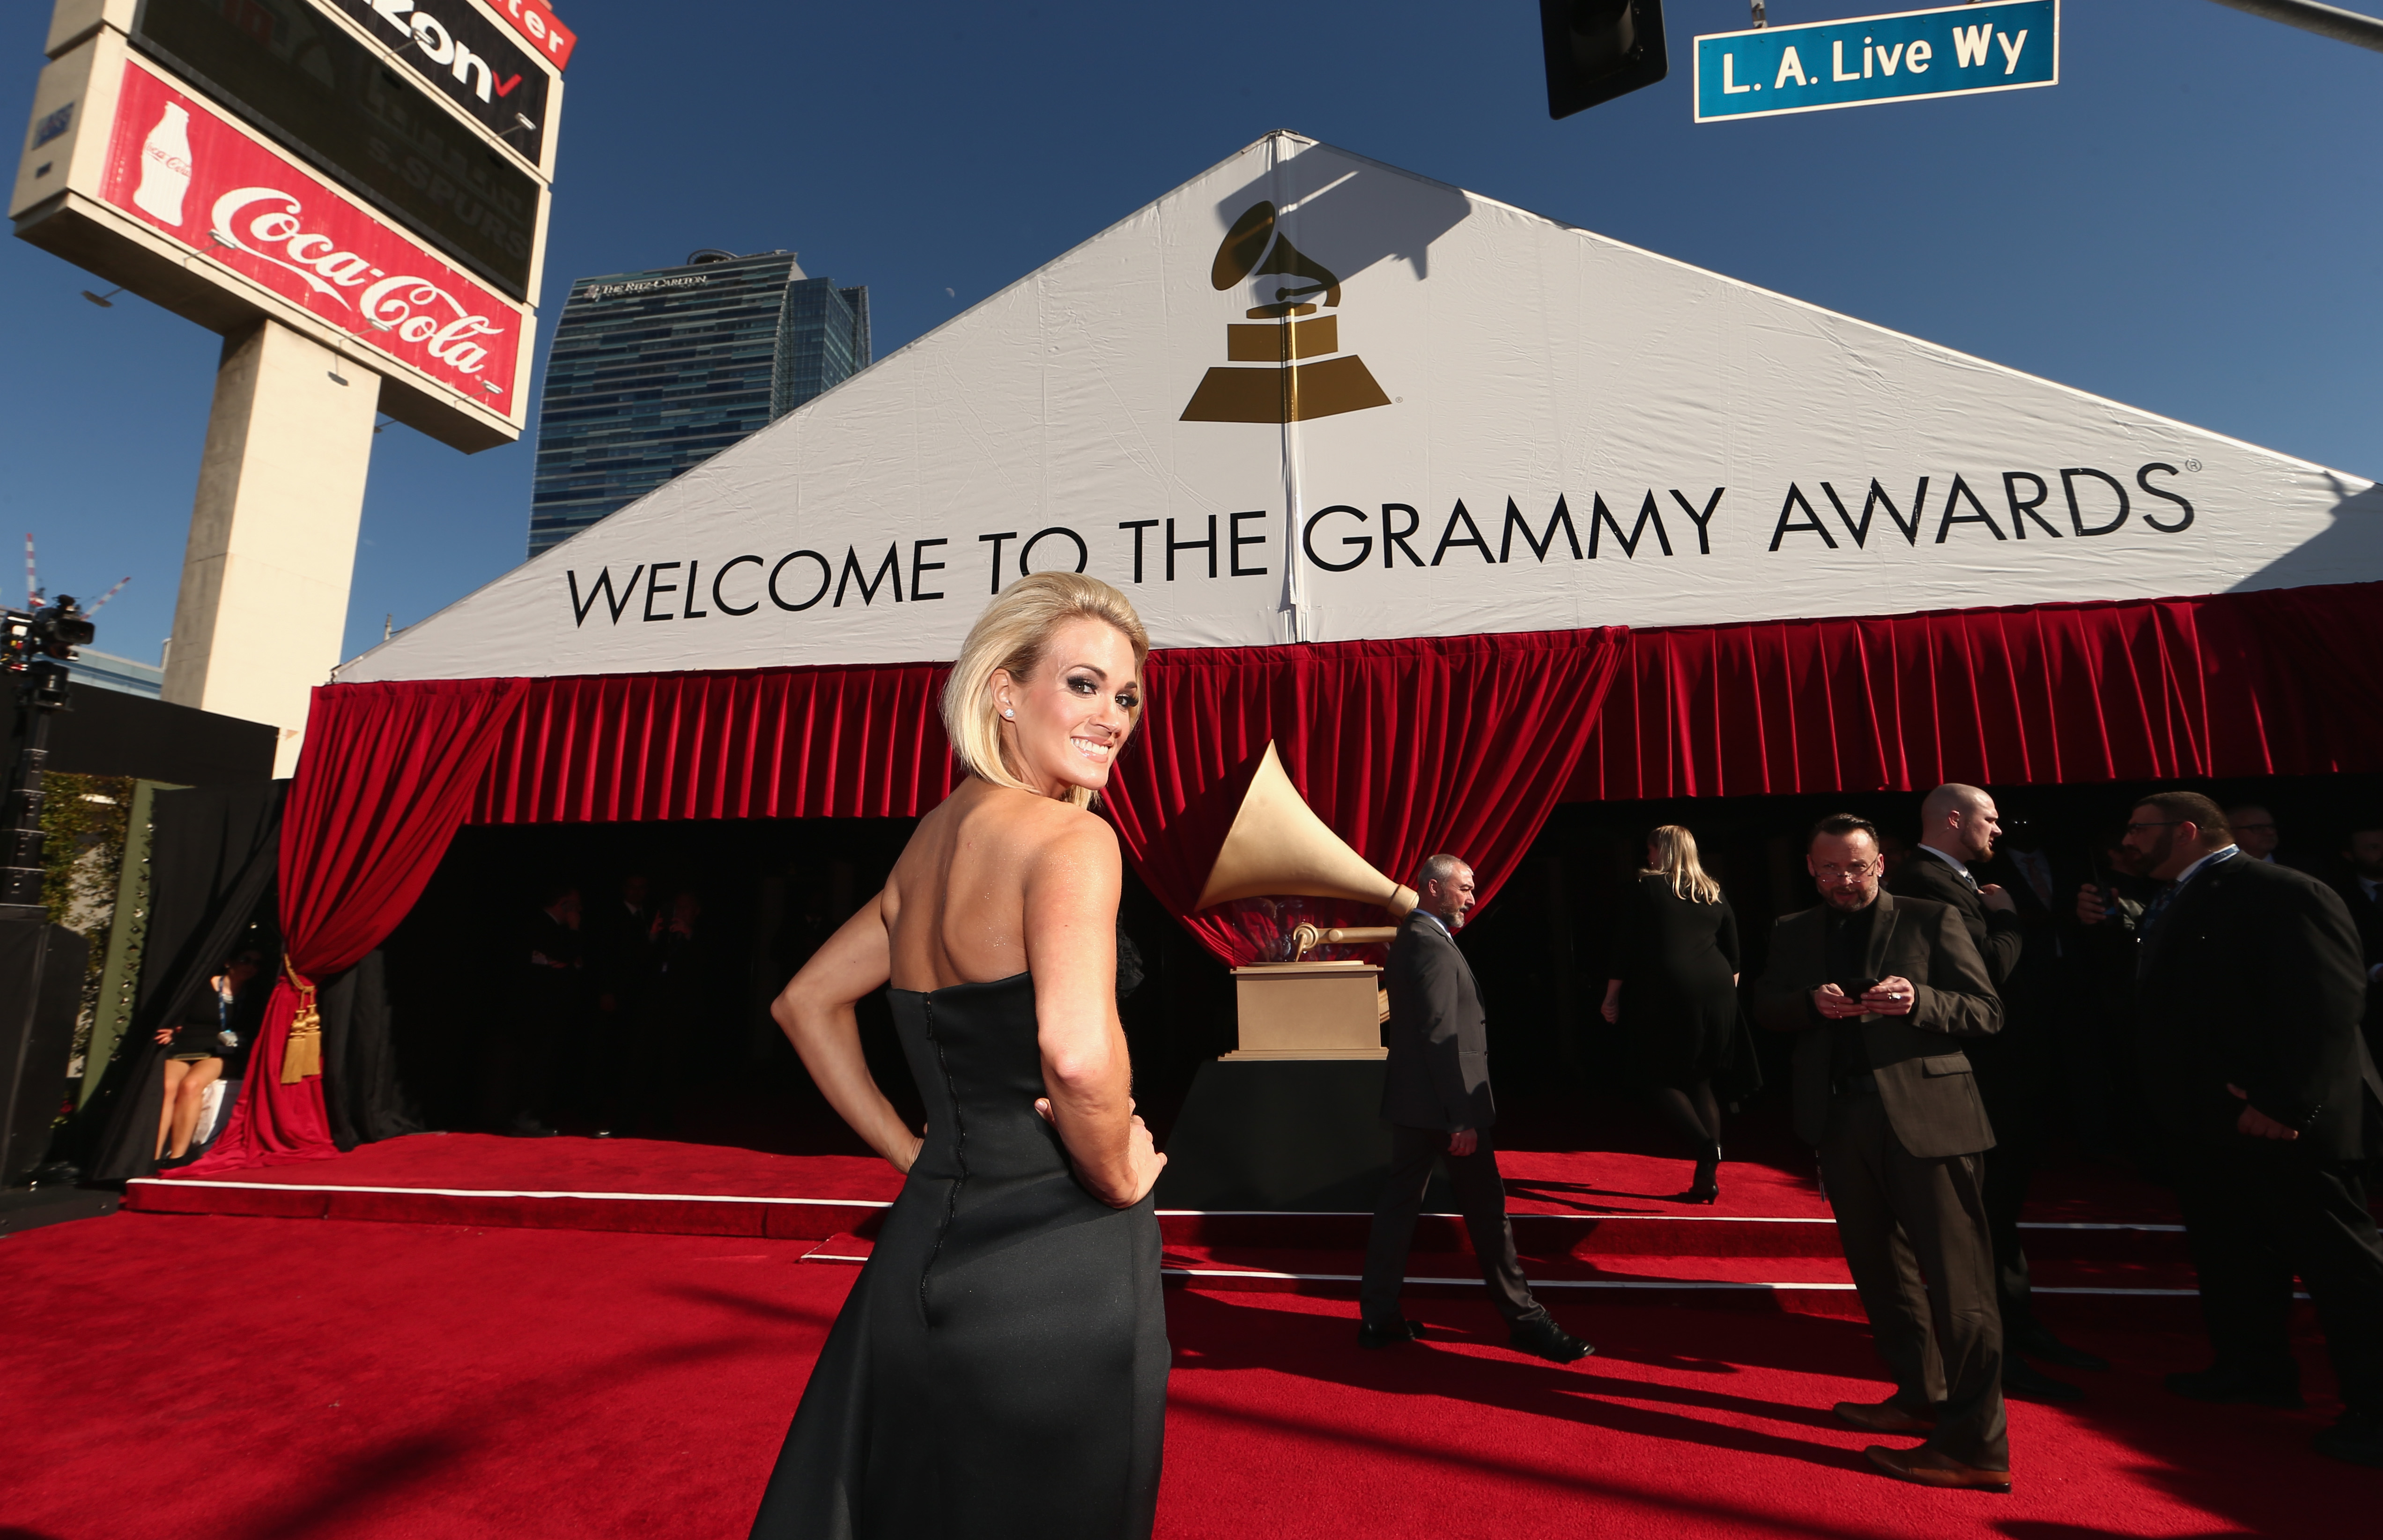 Lav vej mover I fare Grammys 2016: the best, worst and completely confusing red carpet looks -  National | Globalnews.ca